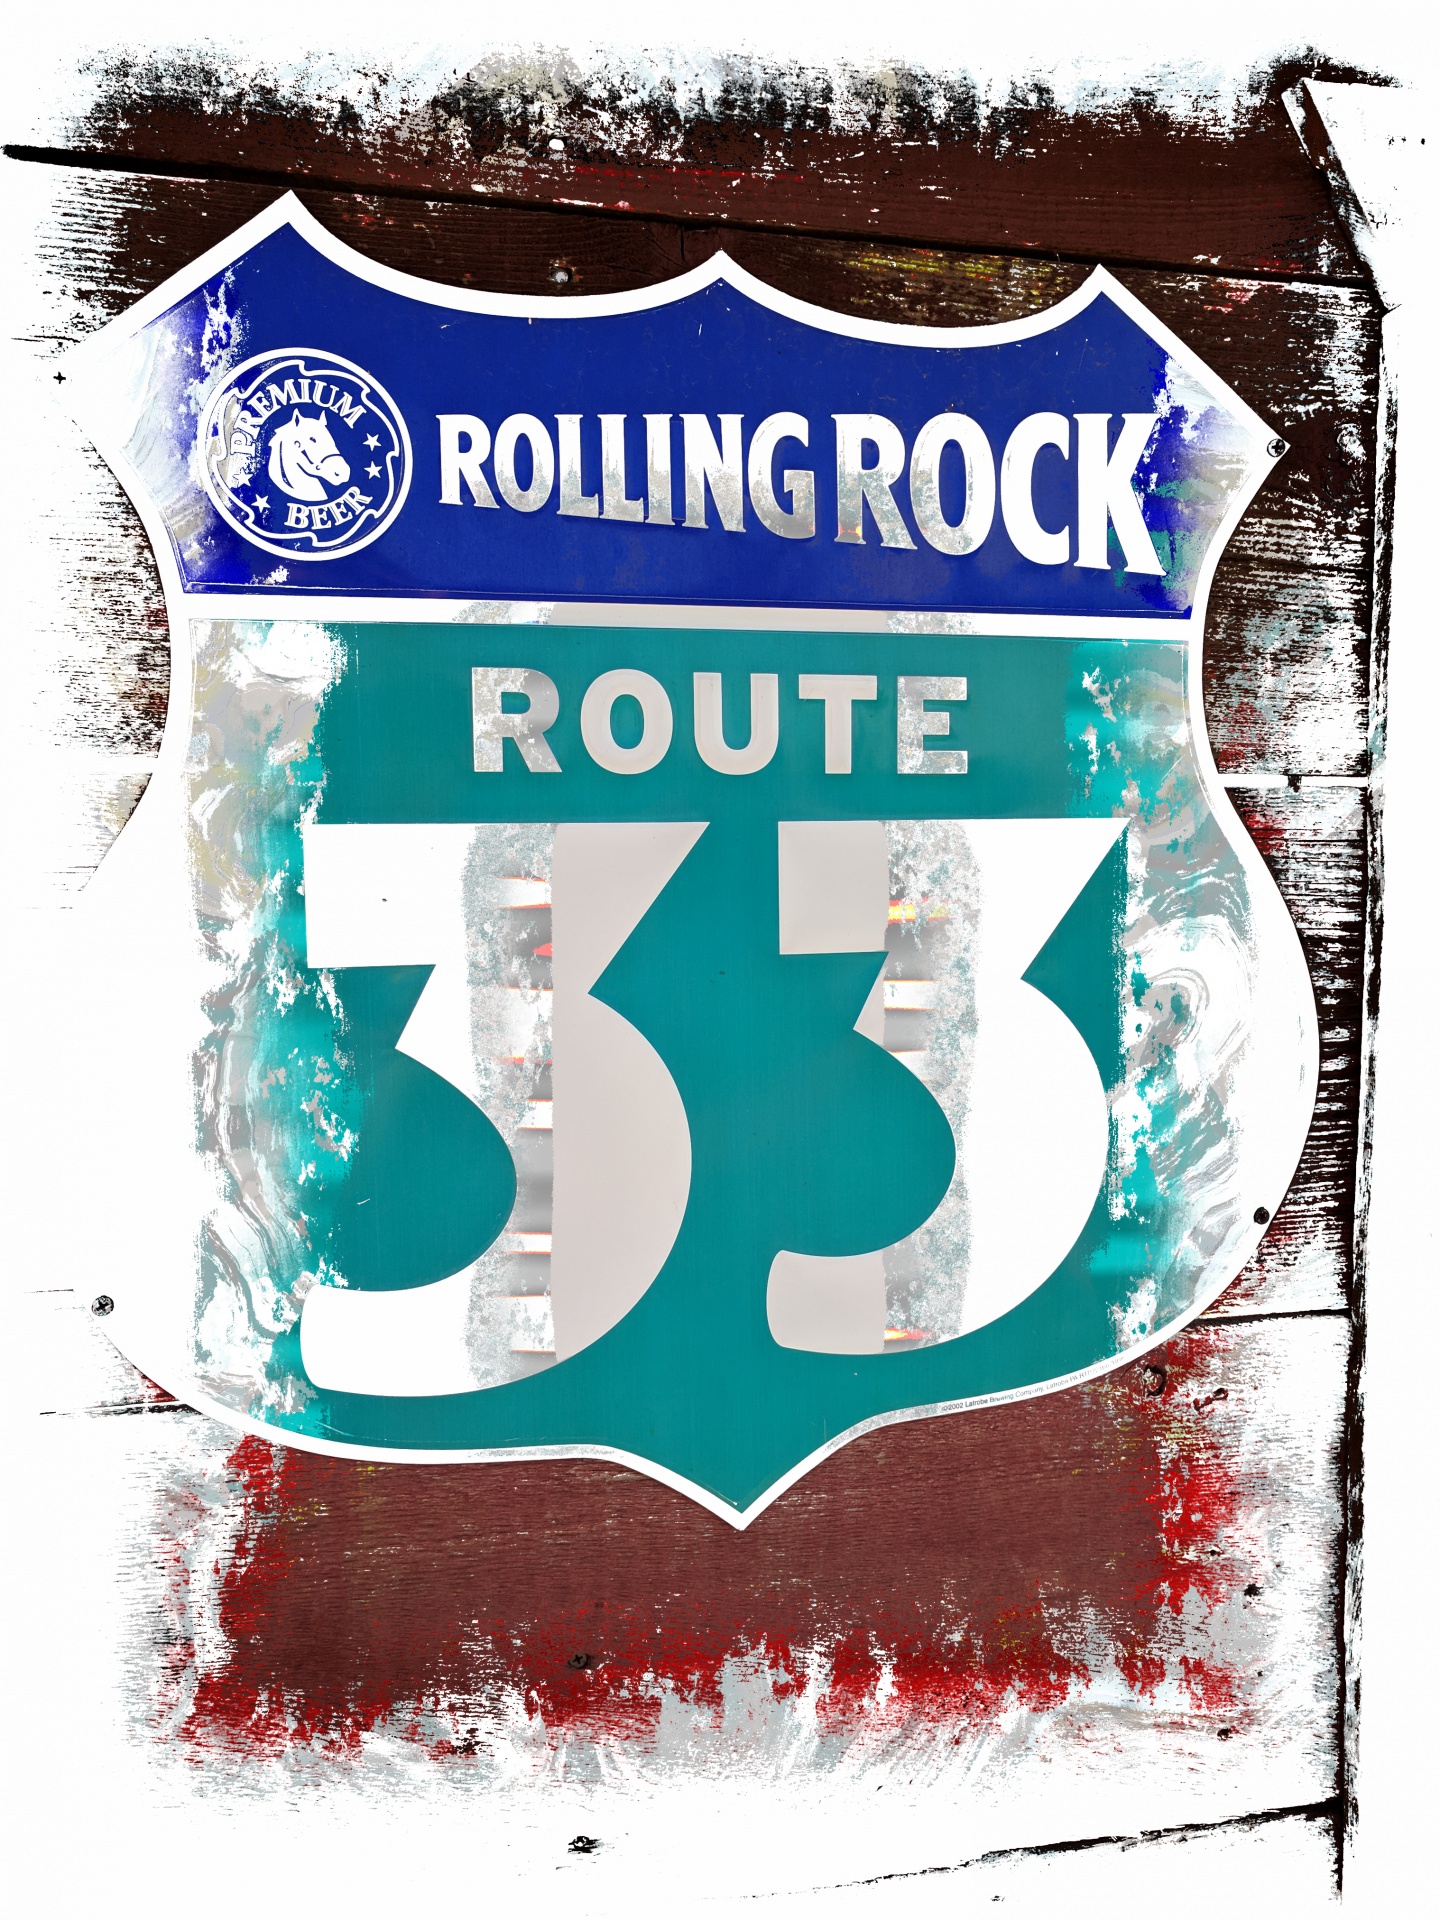 Rolling Rock Route 33 antique grunge road sign